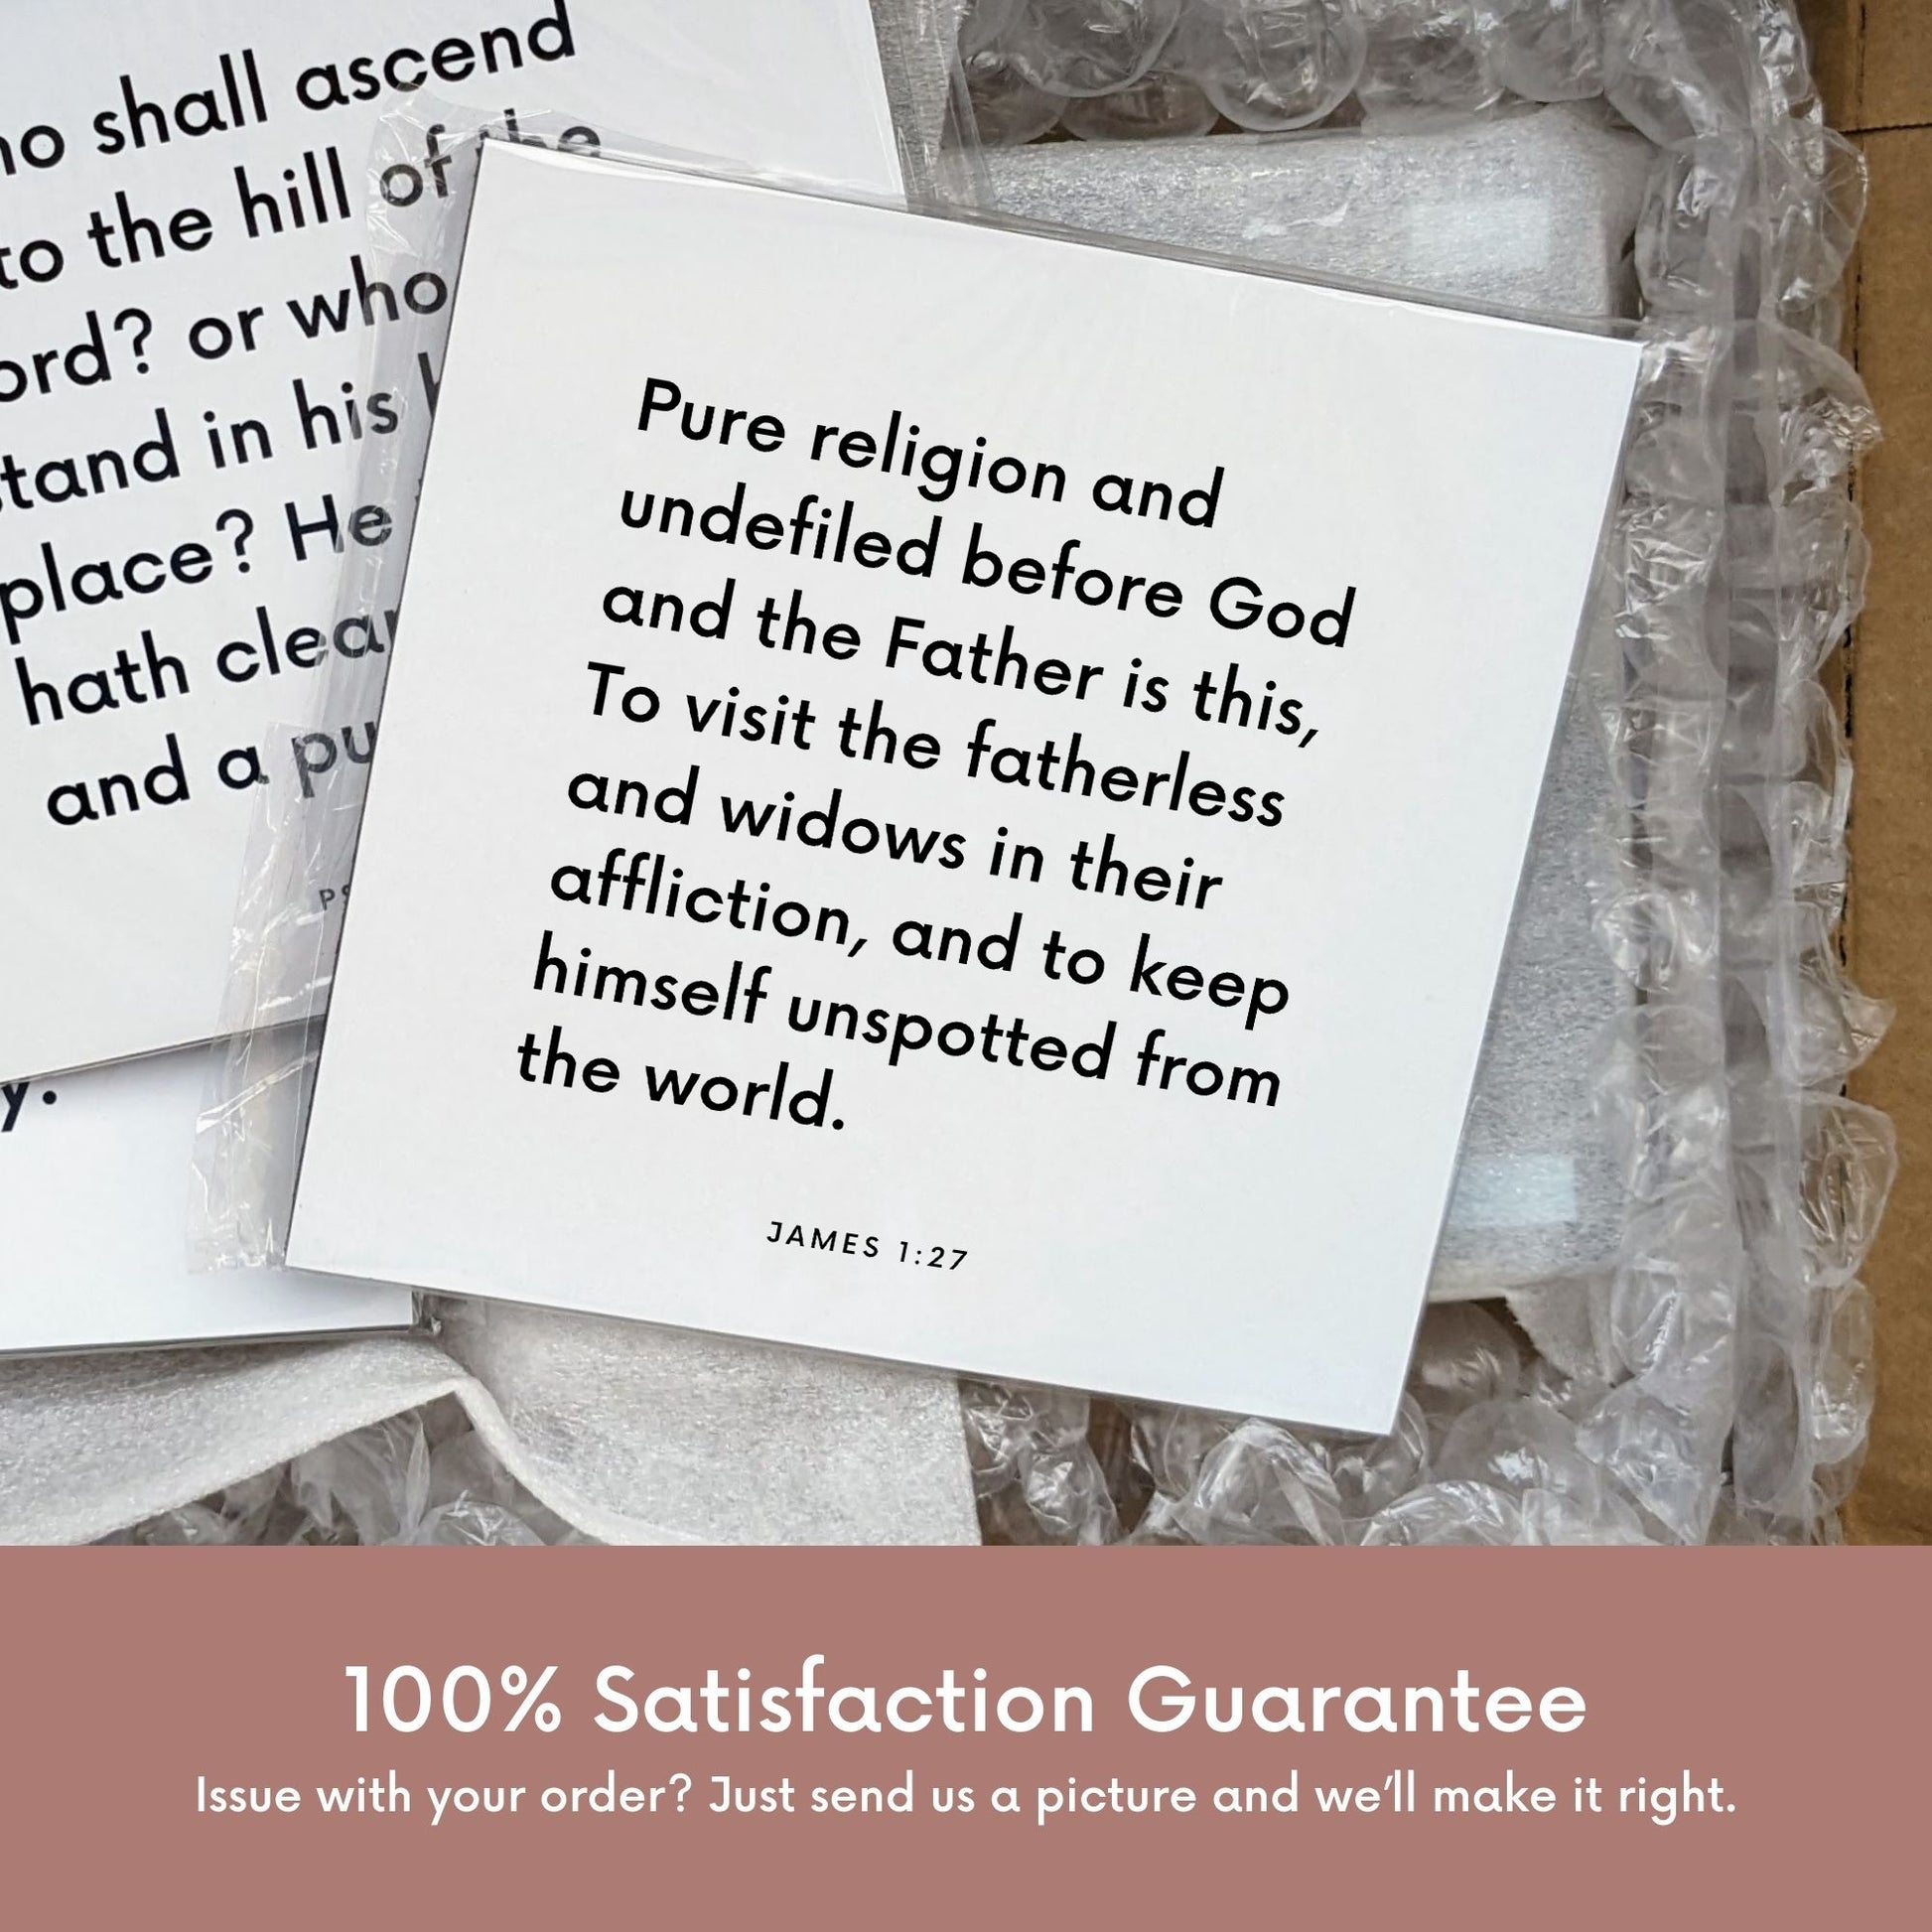 Shipping materials for scripture tile of James 1:27 - "Pure religion is this: to visit the fatherless and widows"